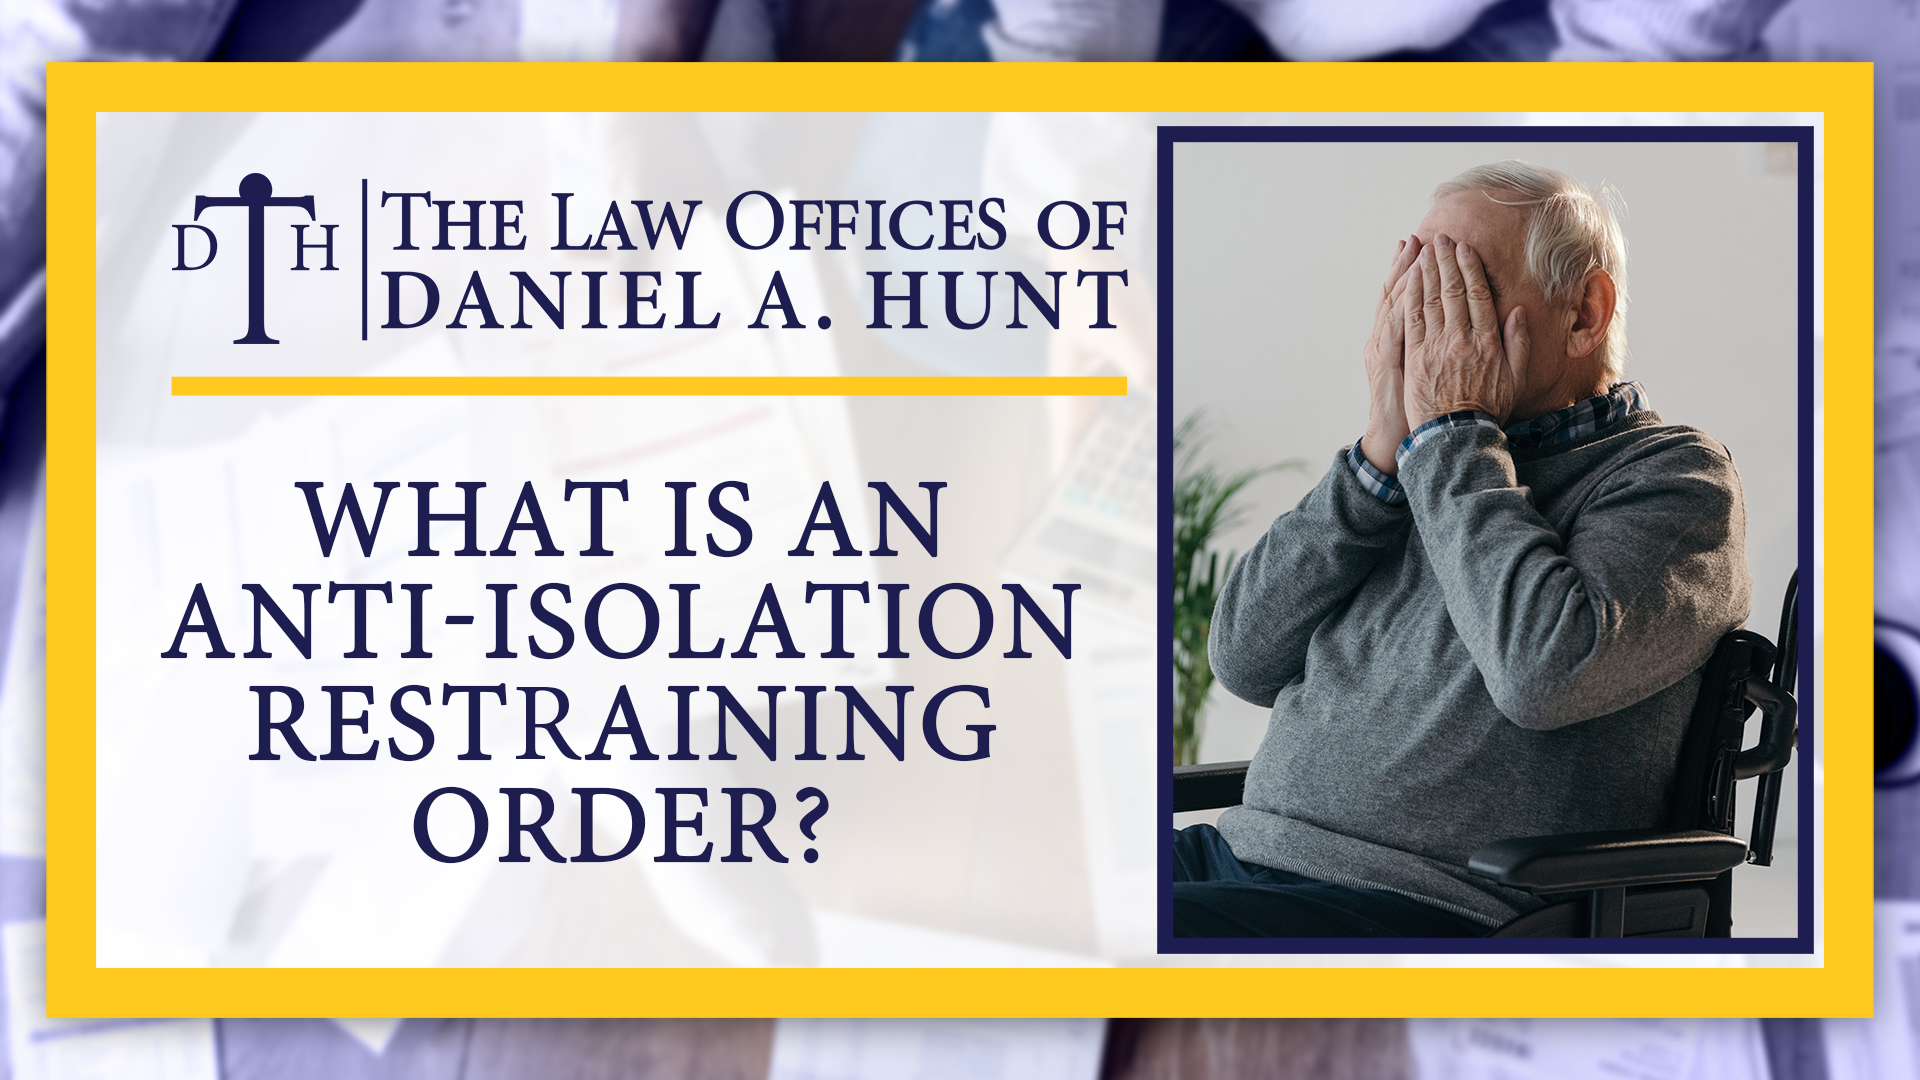 What is an anti-isolation restraining order?